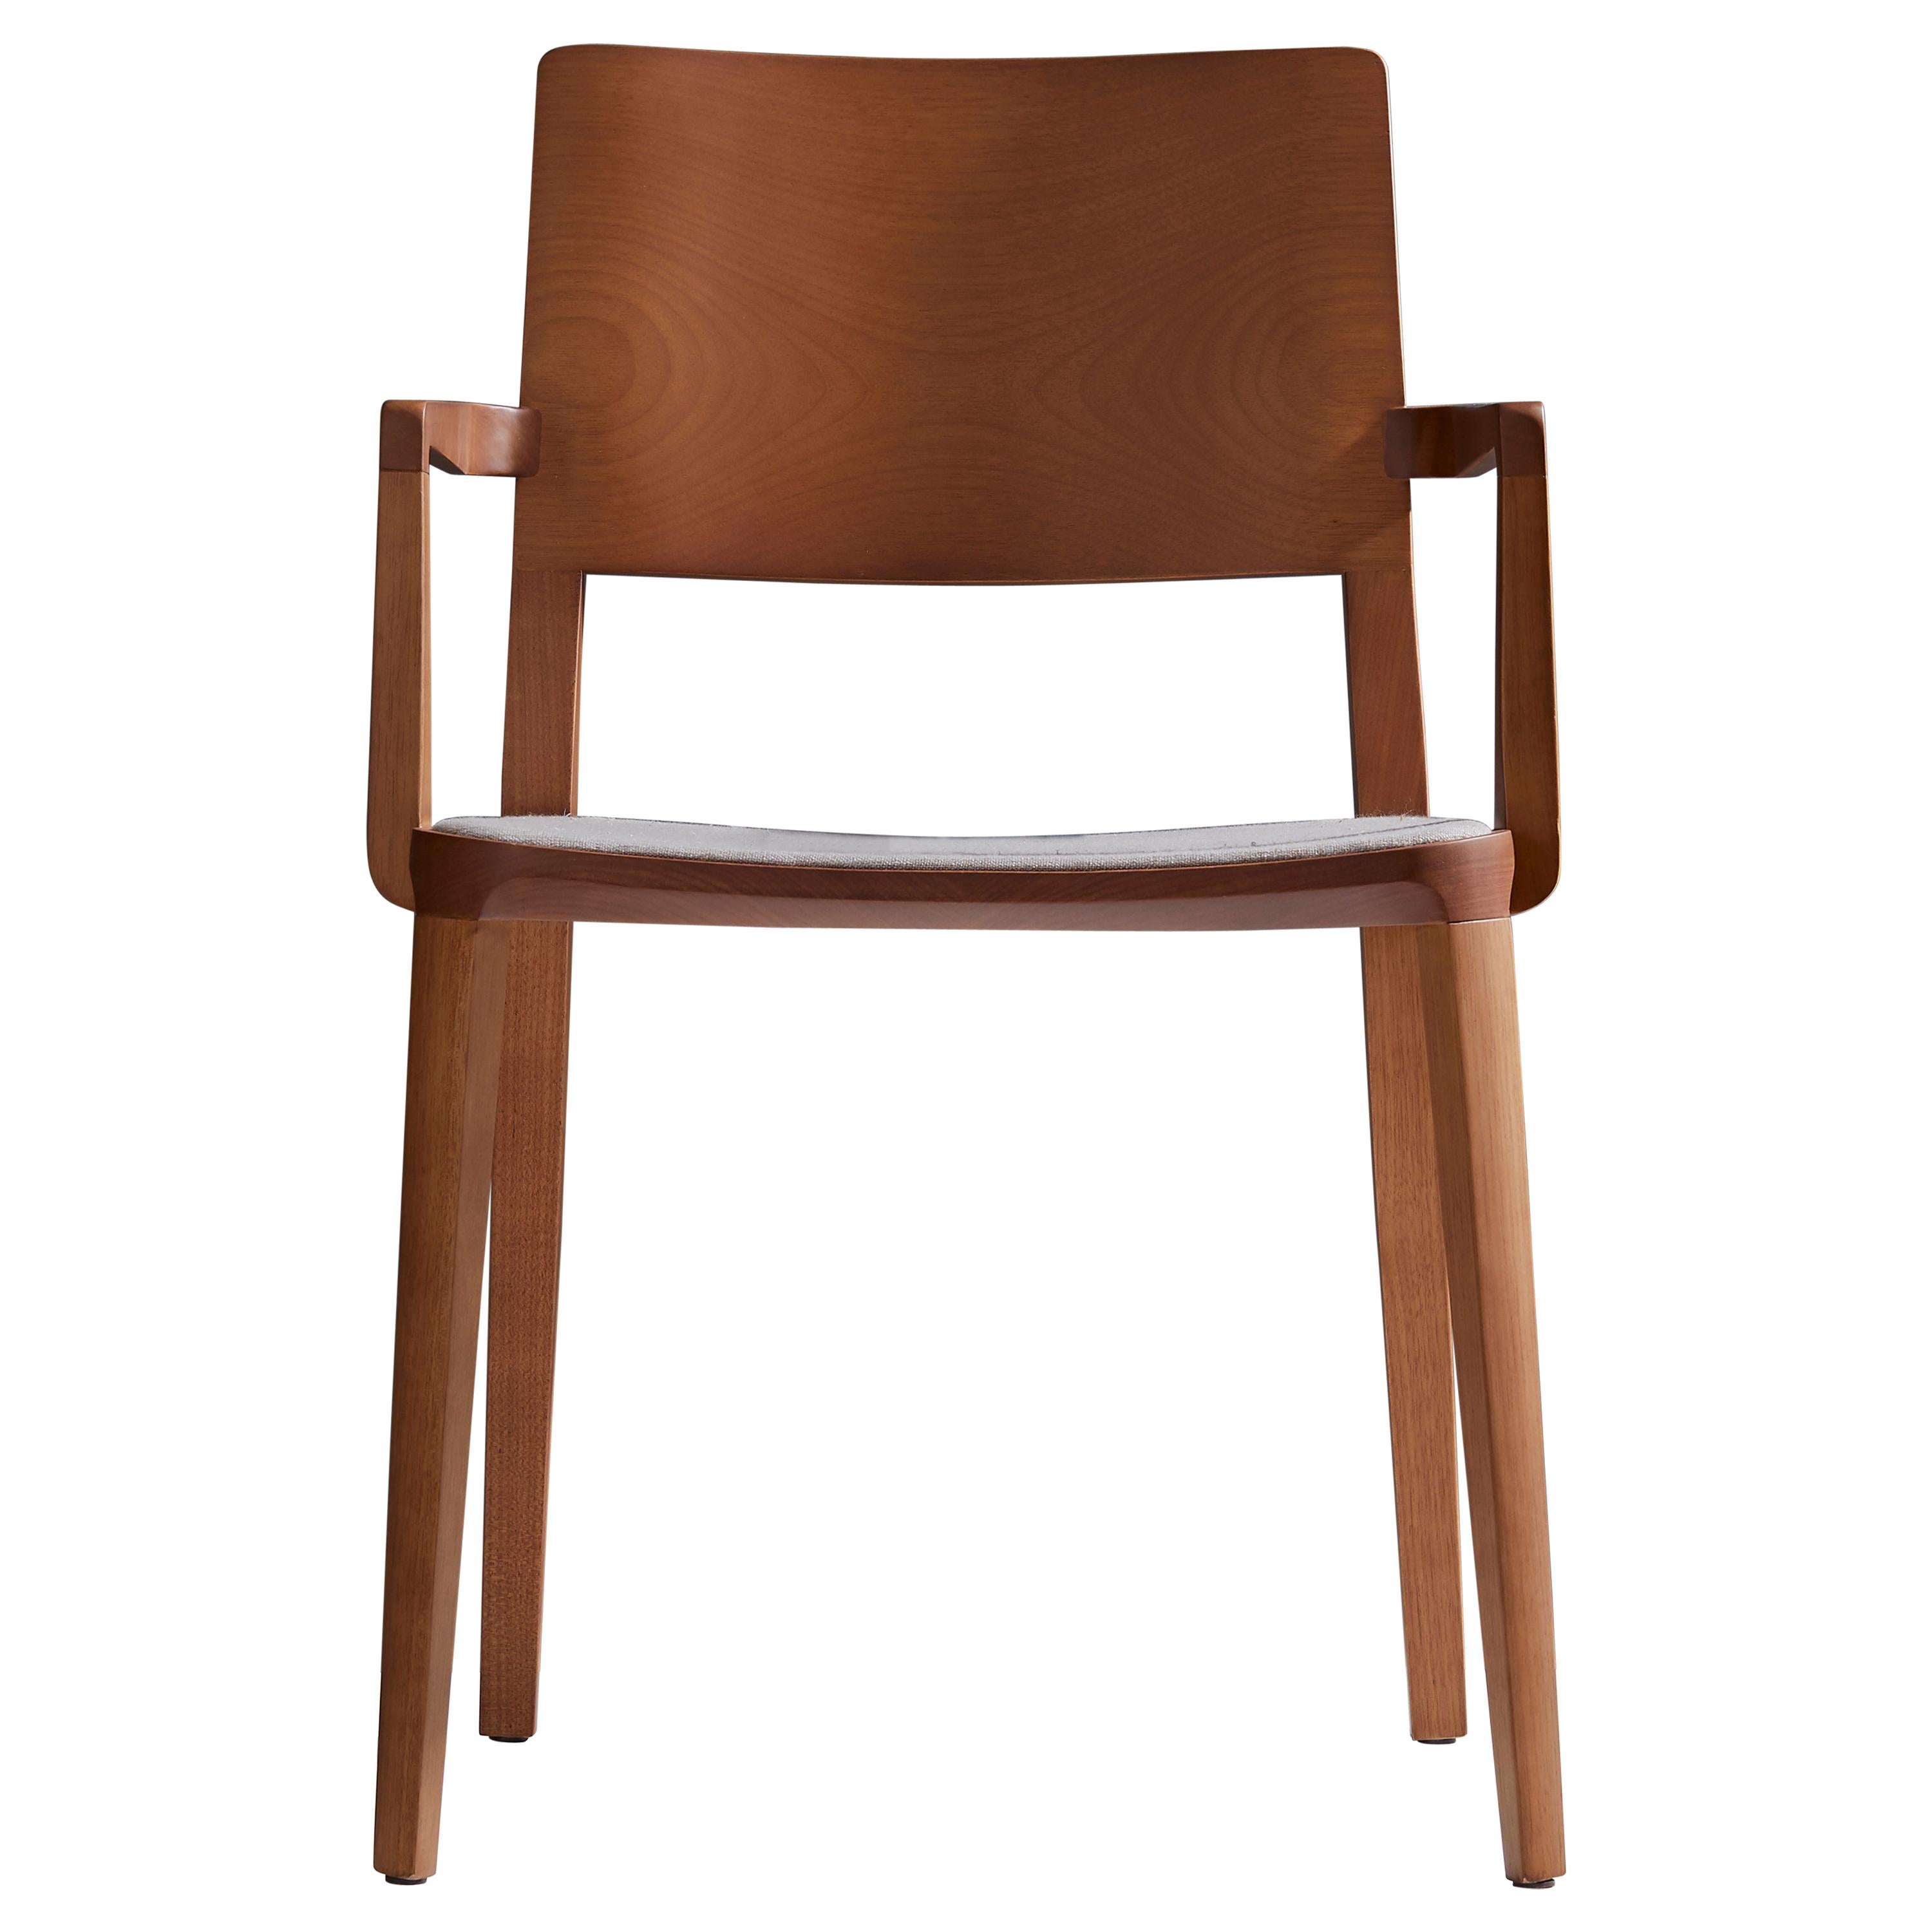 Evo Chair collection.

Our Evo collection is based in the harmonic fusion between geometrical forms and the modern interpretation of wood archetypes. 

All elements that compose the chair are precisely engineered to input full hardwood blocks to